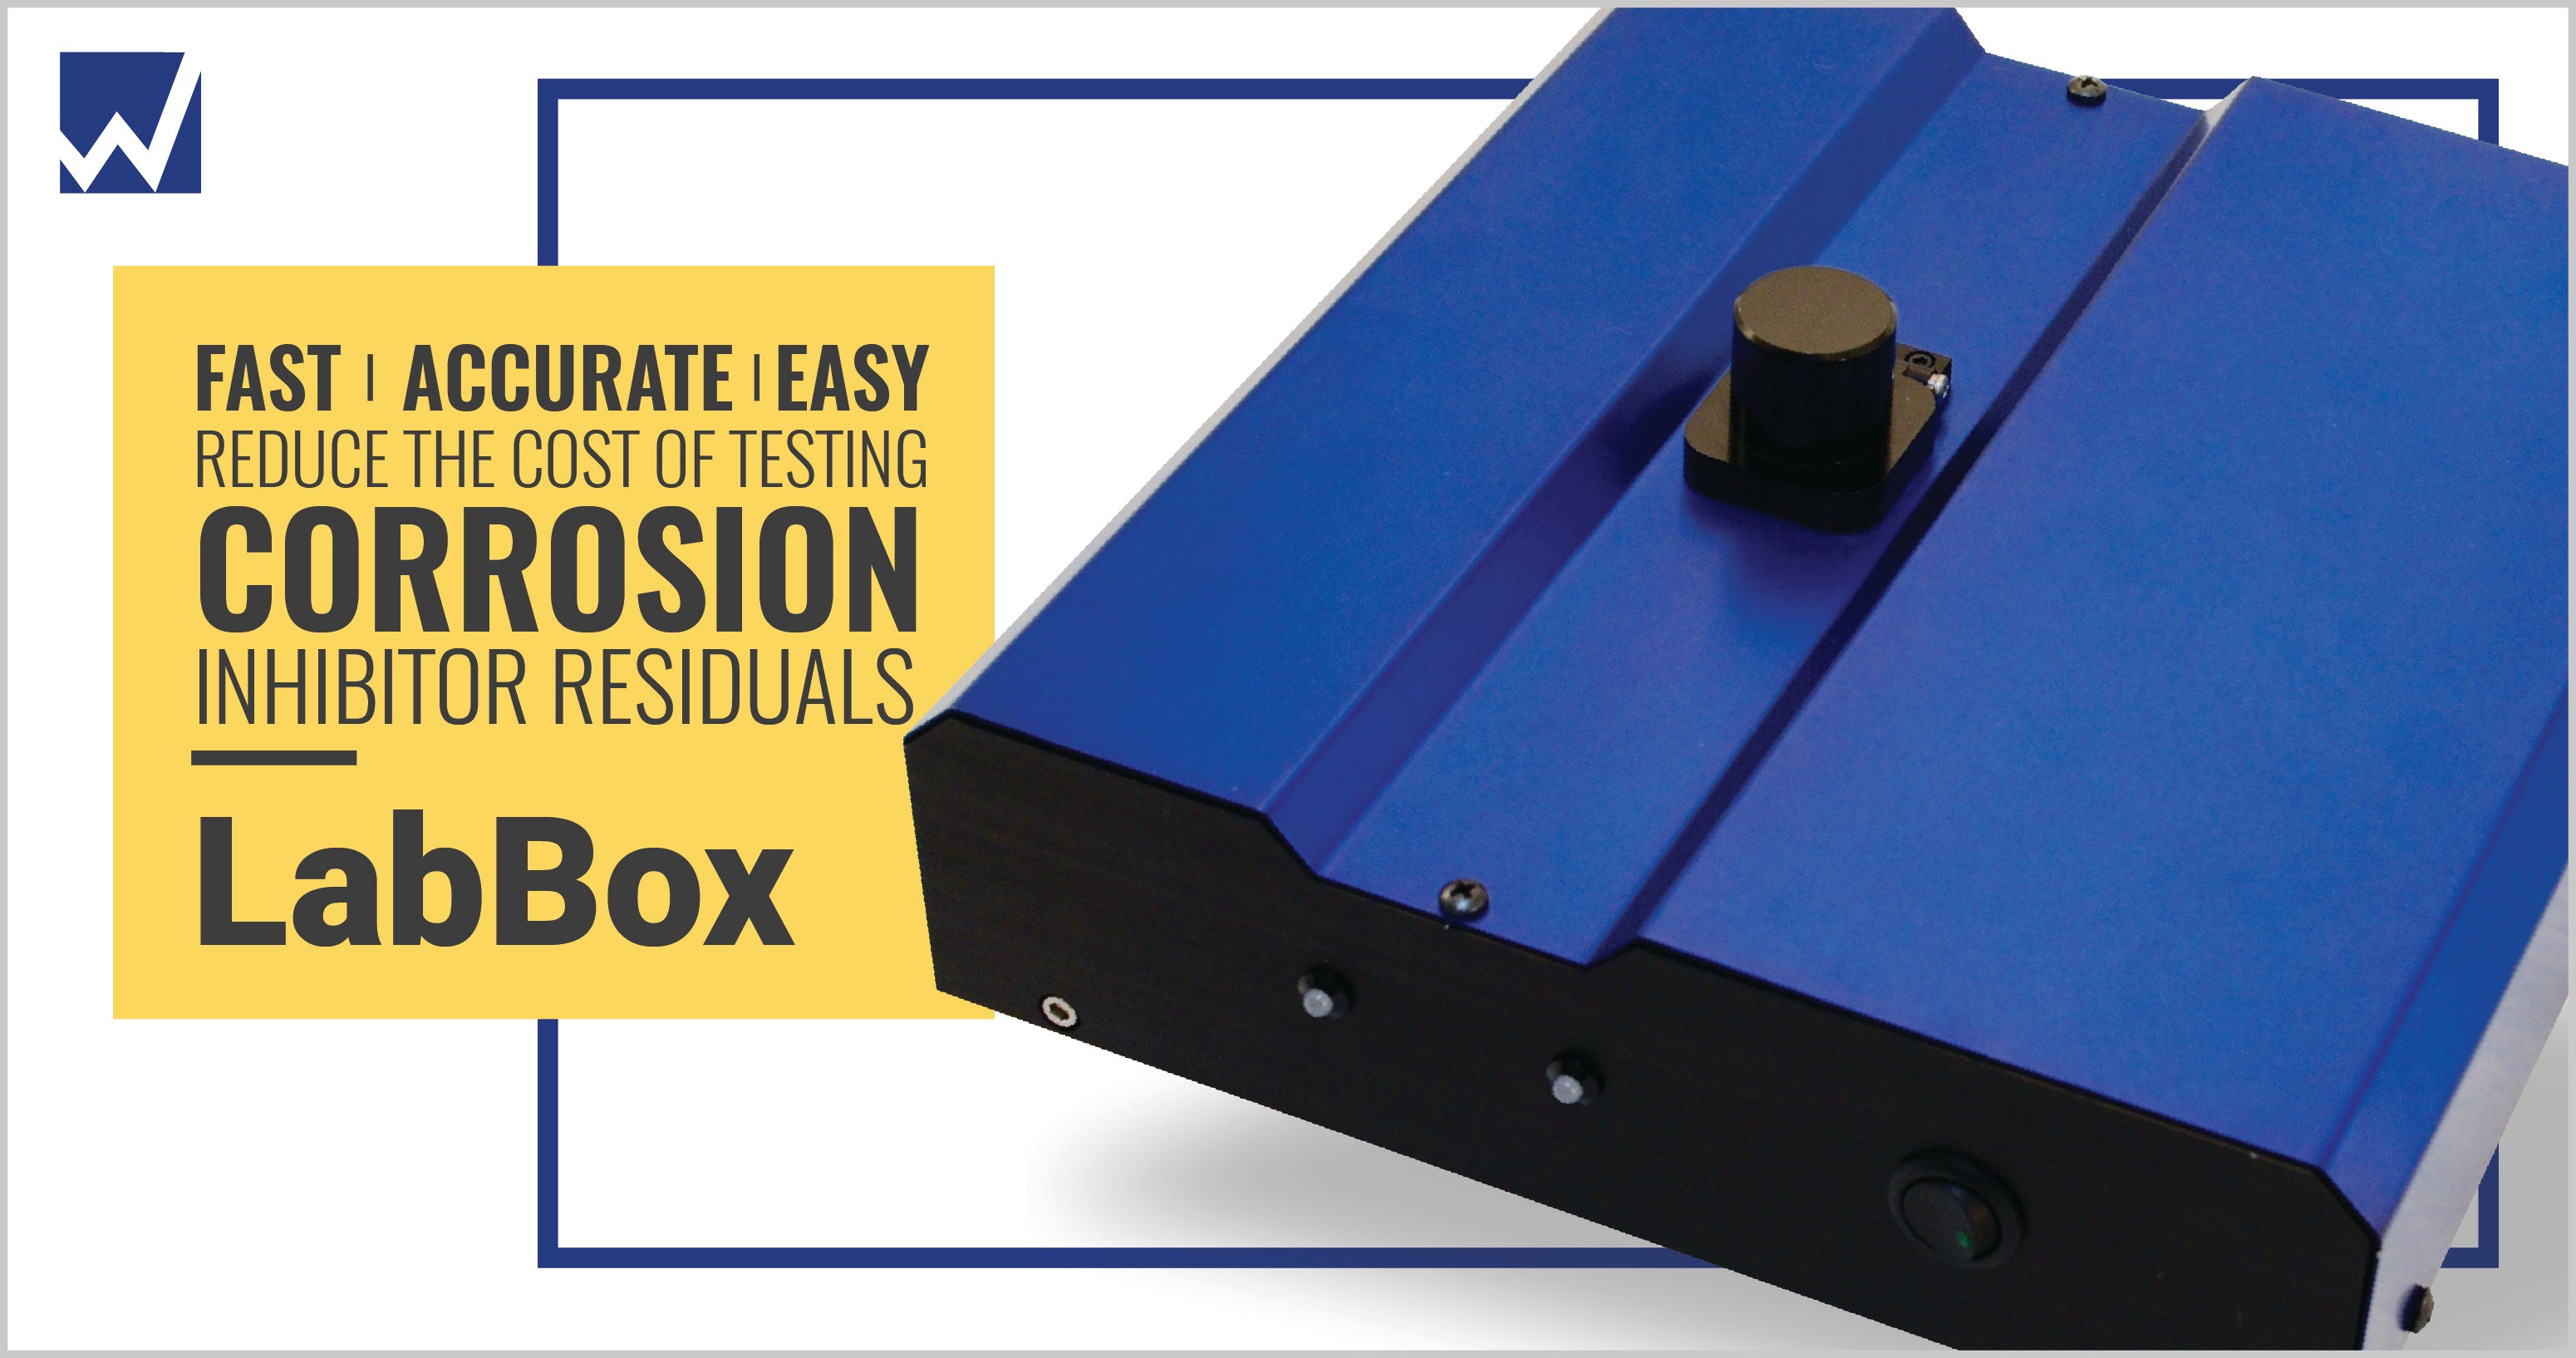 LabBox Fluorescence Measurements for corrosion inhibitor residuals main benefits